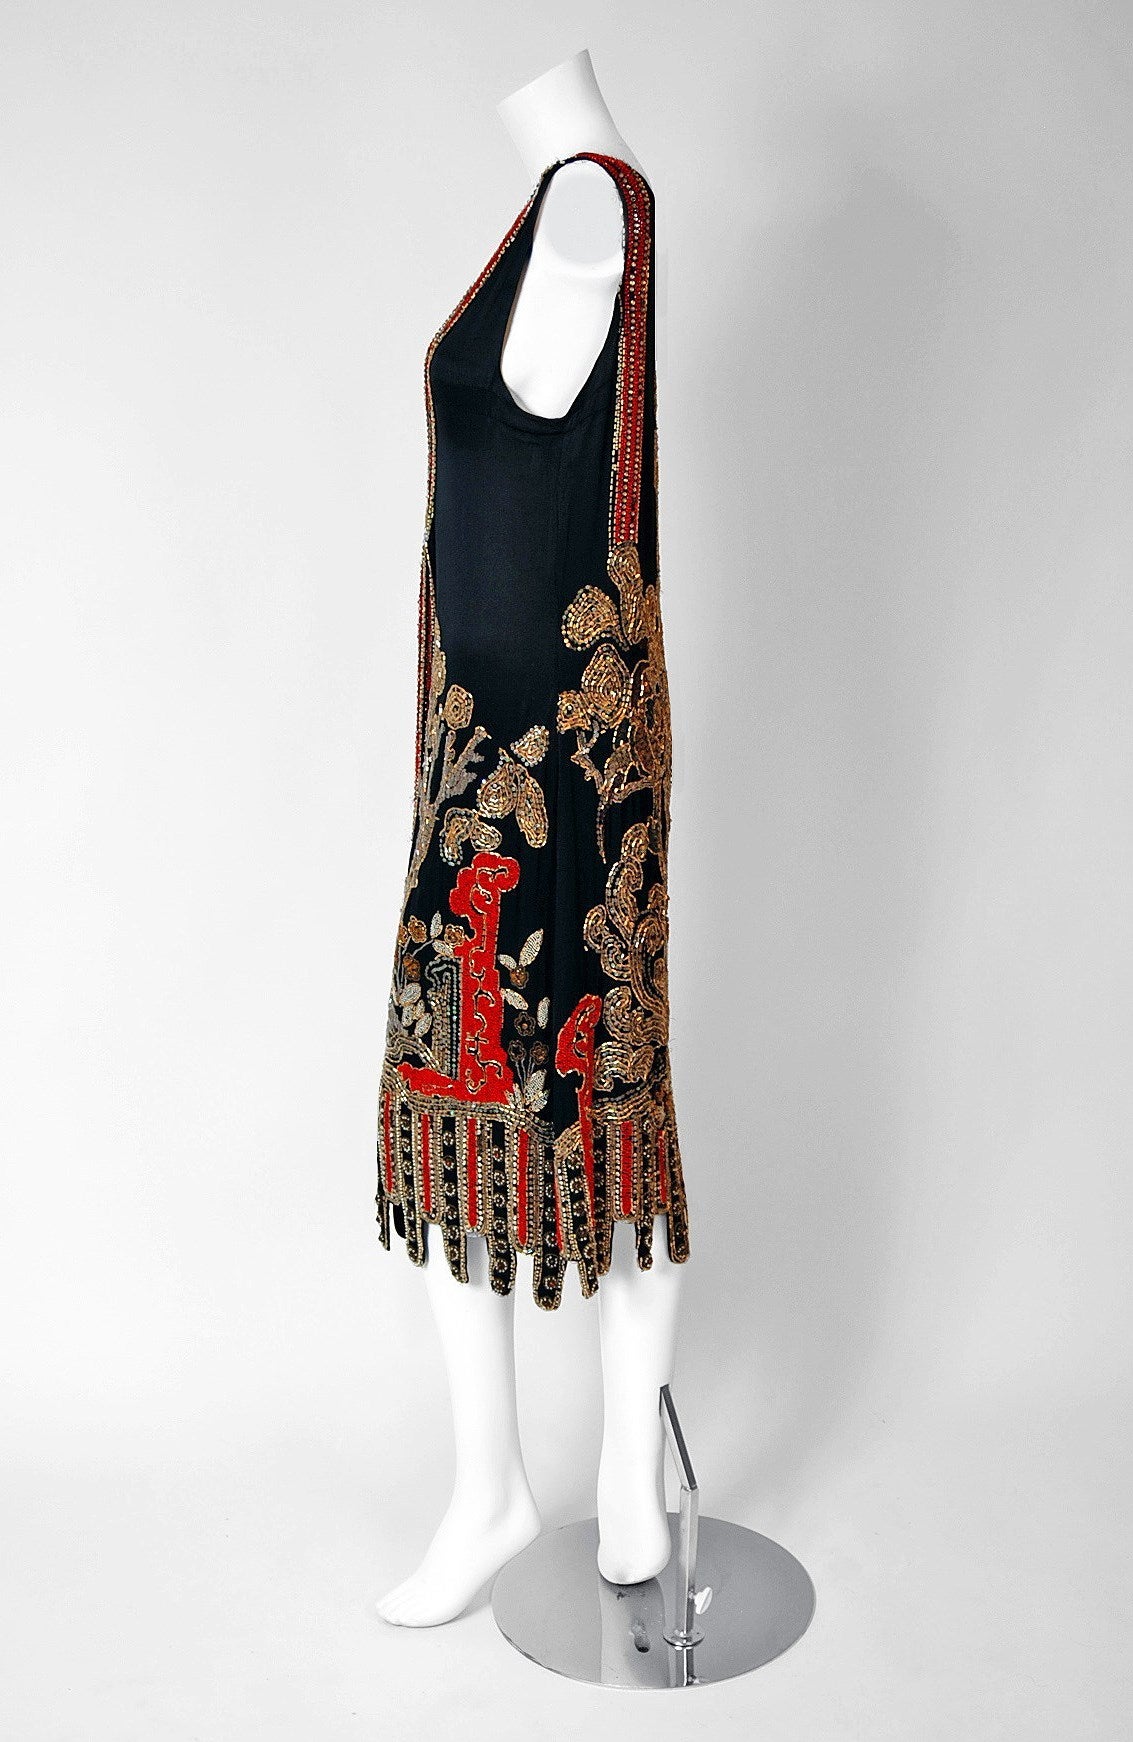 There are lots of lovely 1920's garments still around, but every once in a while I come across one that sets my heart a flutter! This is an extraordinarily beautiful and exceptional 1920's French couture museum-quality silk dance dress. The Asian